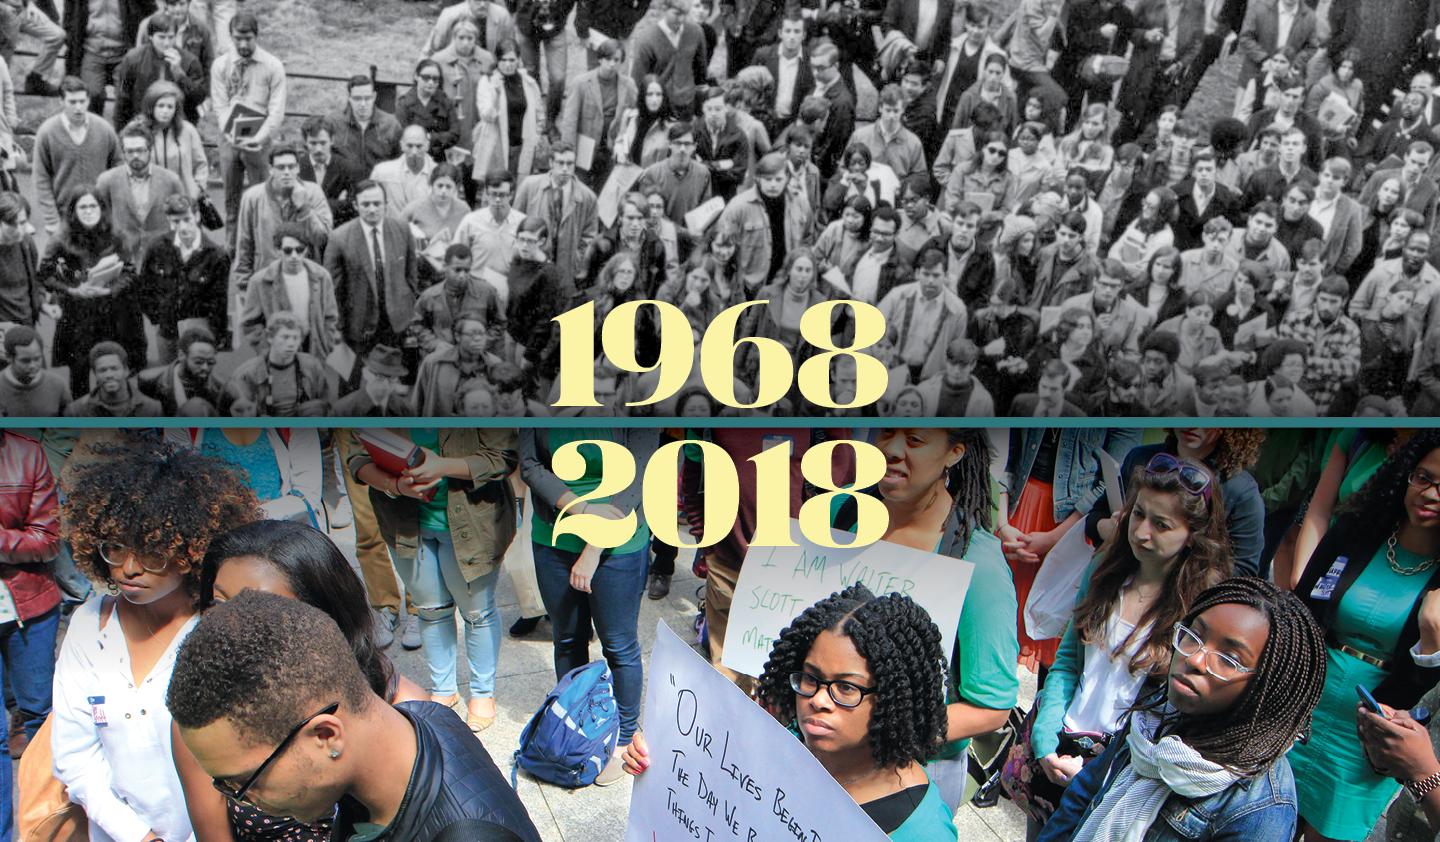 Demonstration in Washington Square Park in 1968, and BALSA demonstration against police violence in 2015.